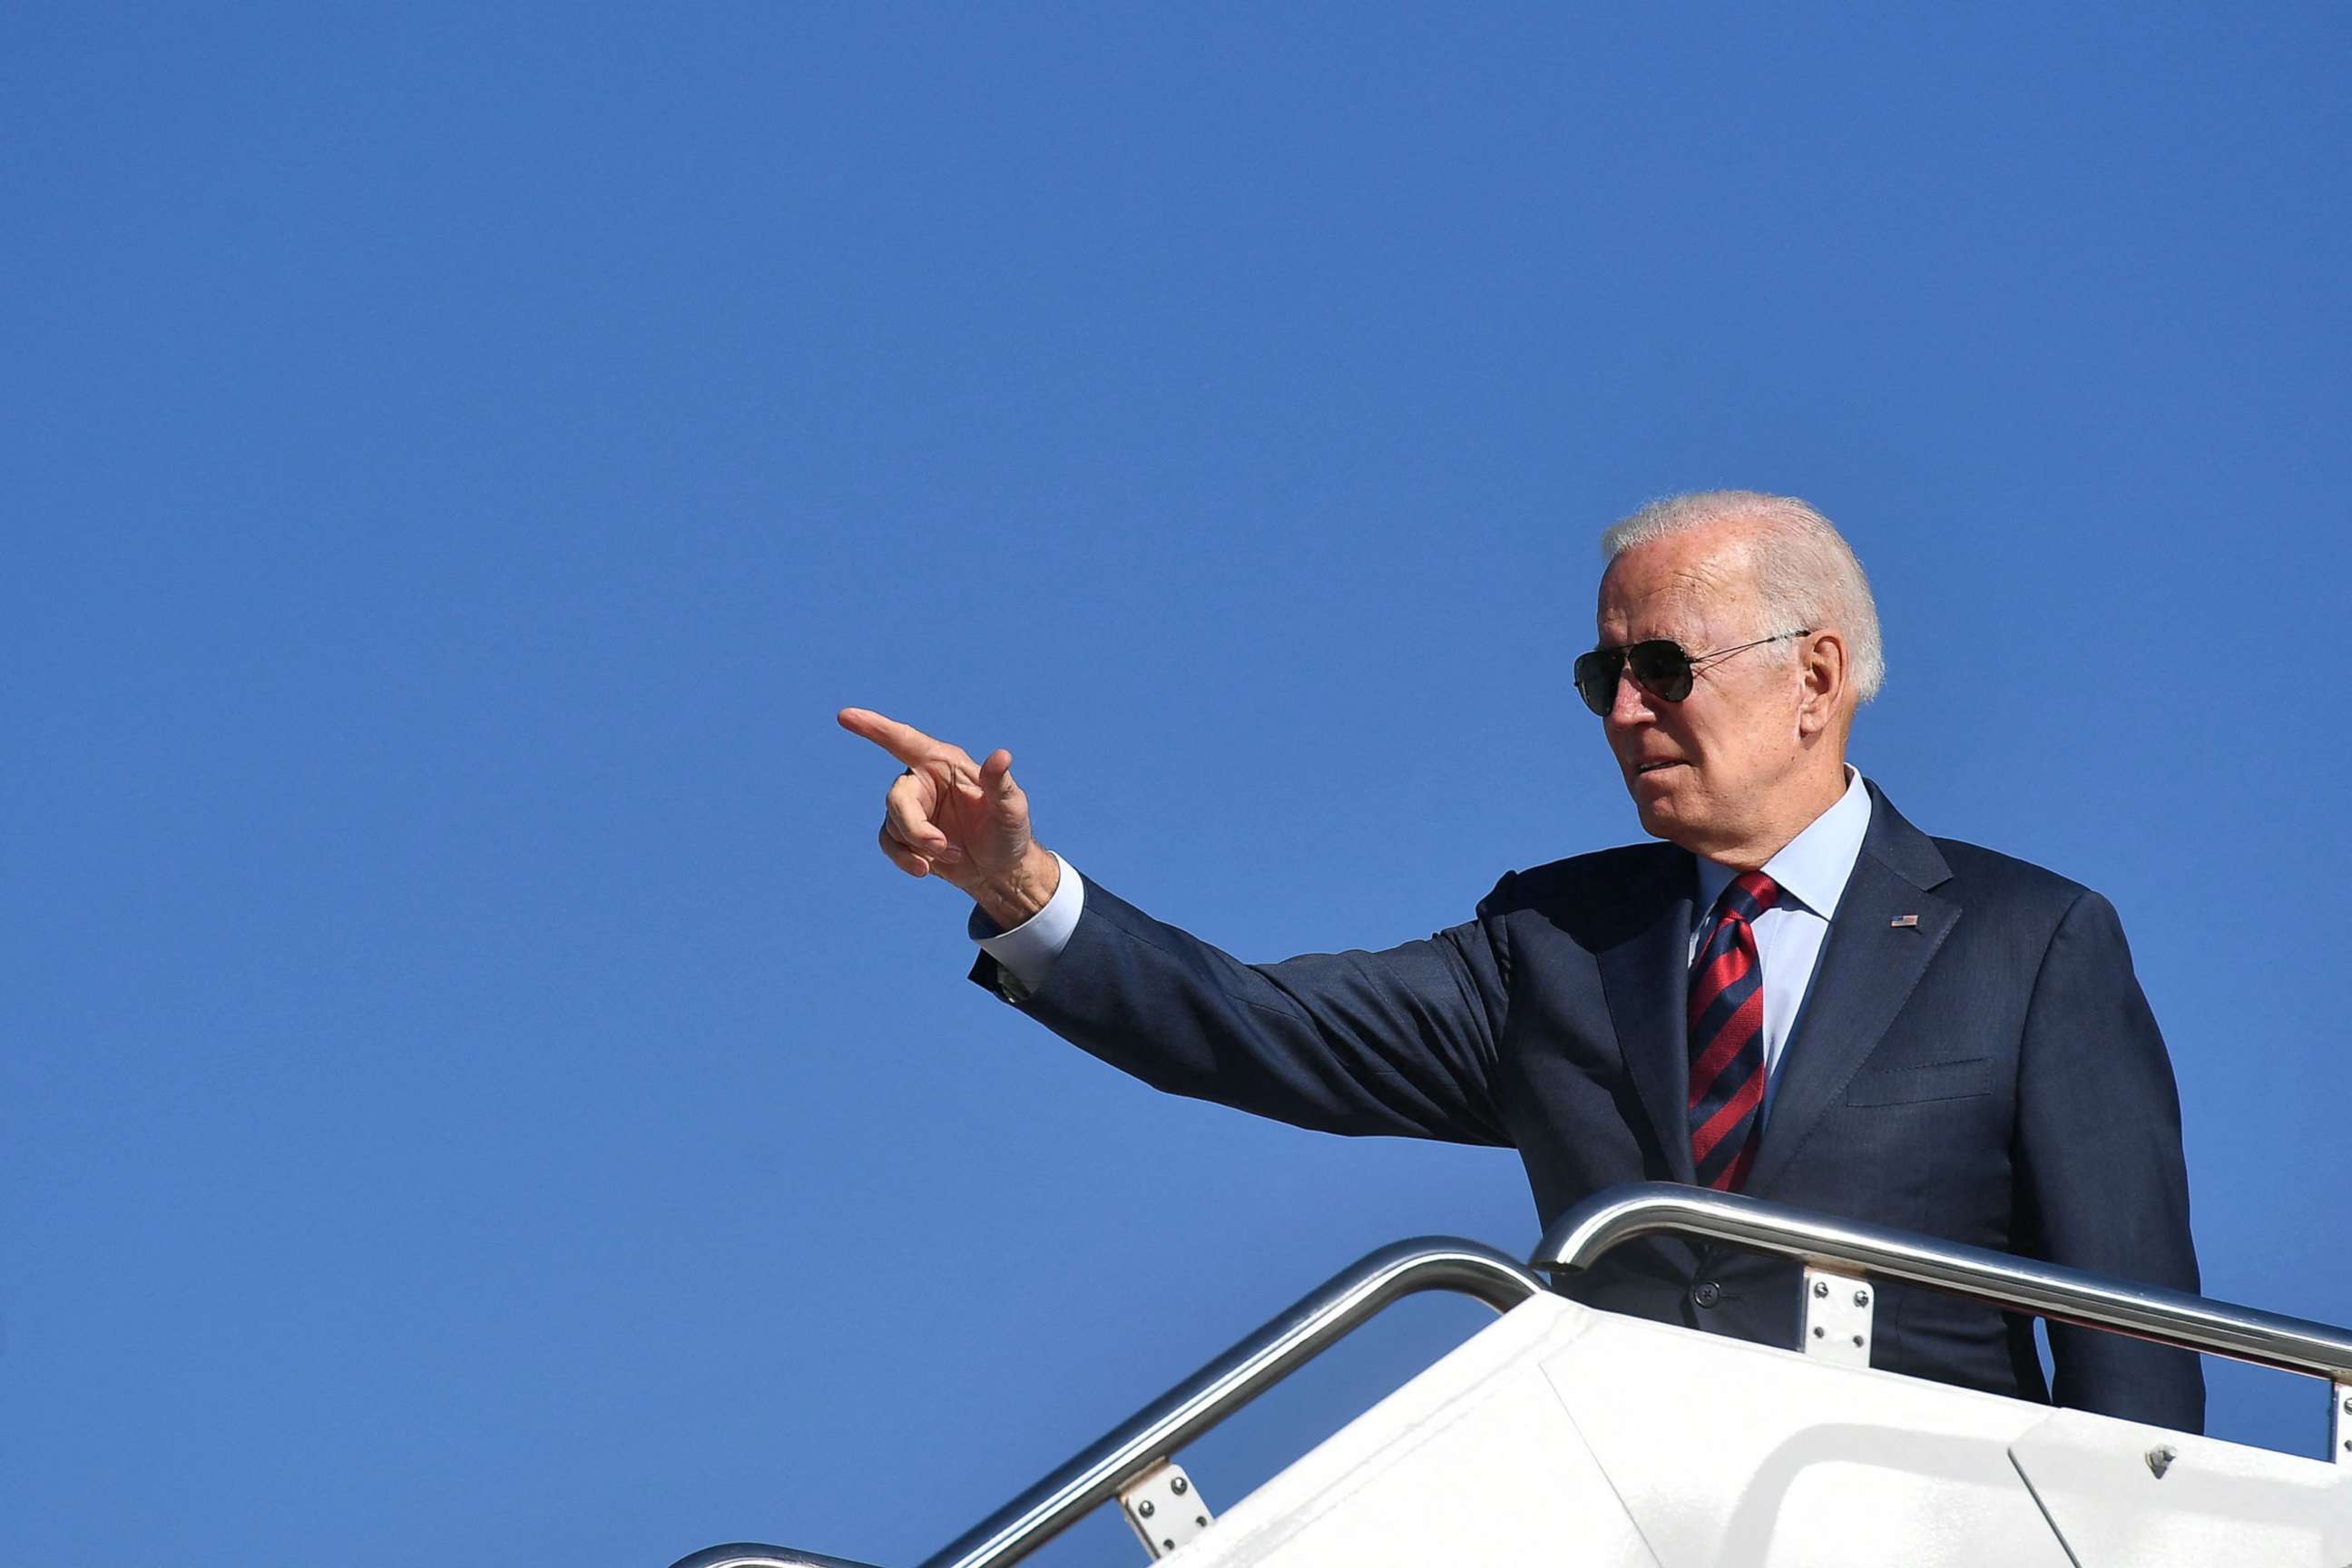 PHOTO: President Joe Biden boards Air Force One before departing from Andrews Air Force Base in Maryland, Nov. 16, 2021, for a trip to Woodstock, N.H., to promote his infrastructure bill.